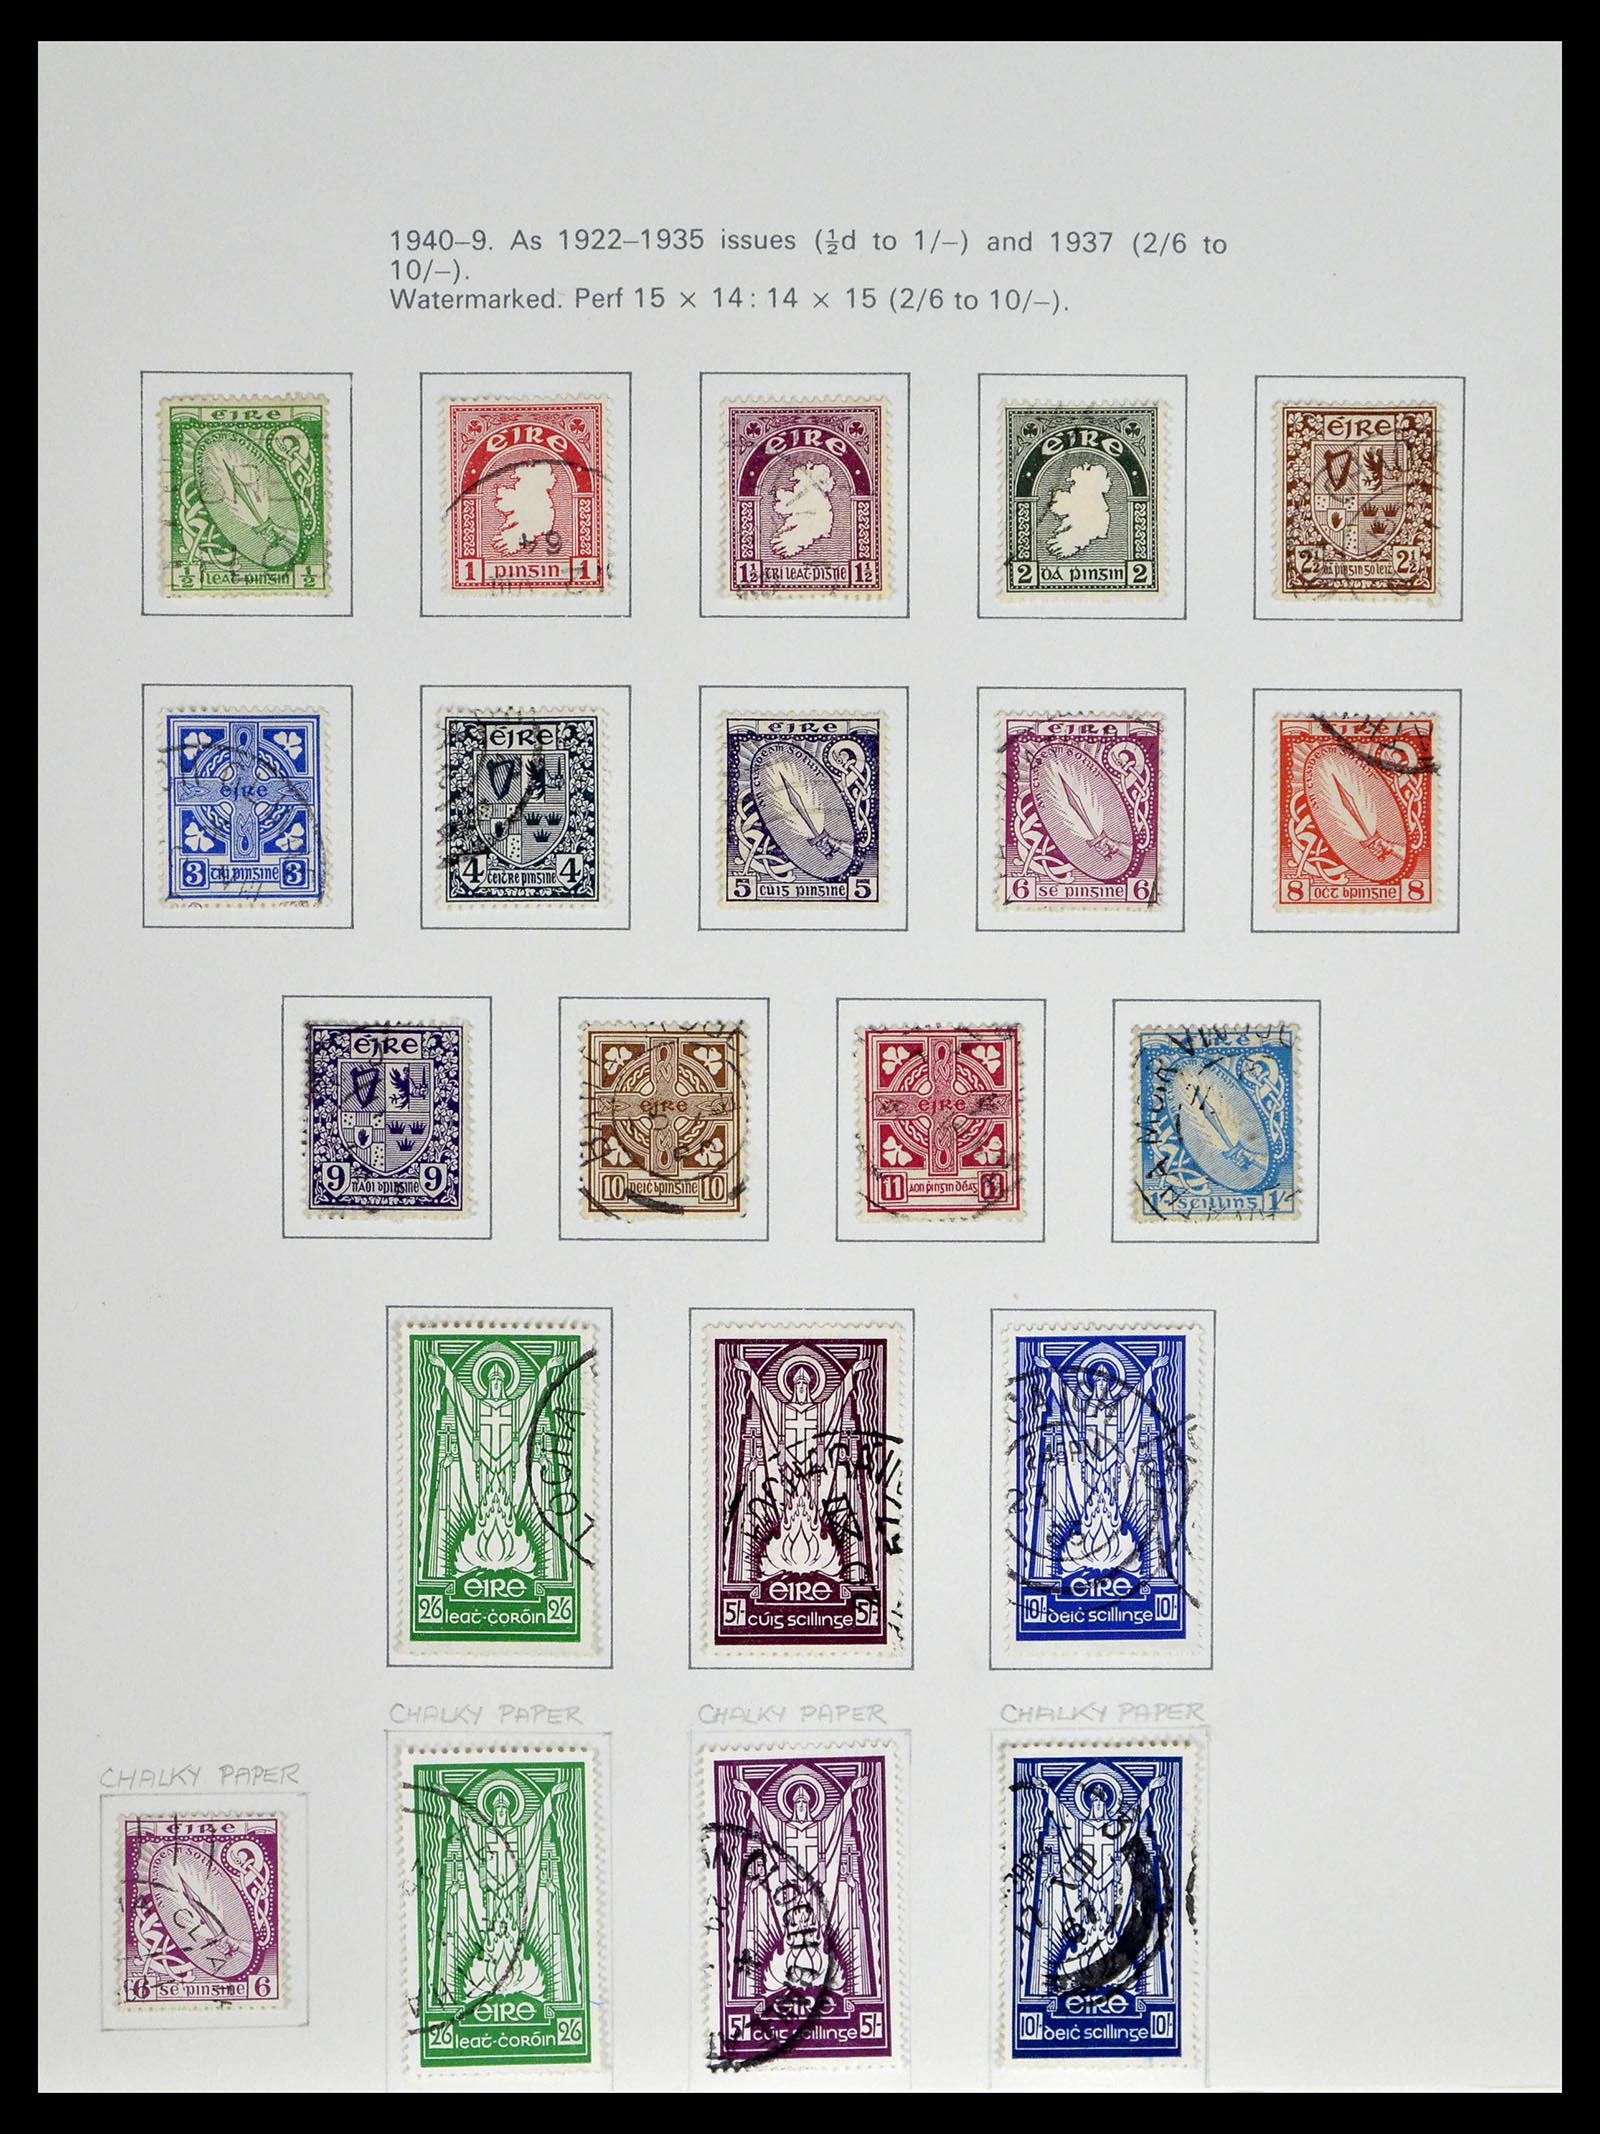 39173 0002 - Stamp collection 39173 Ireland 1937-1979.